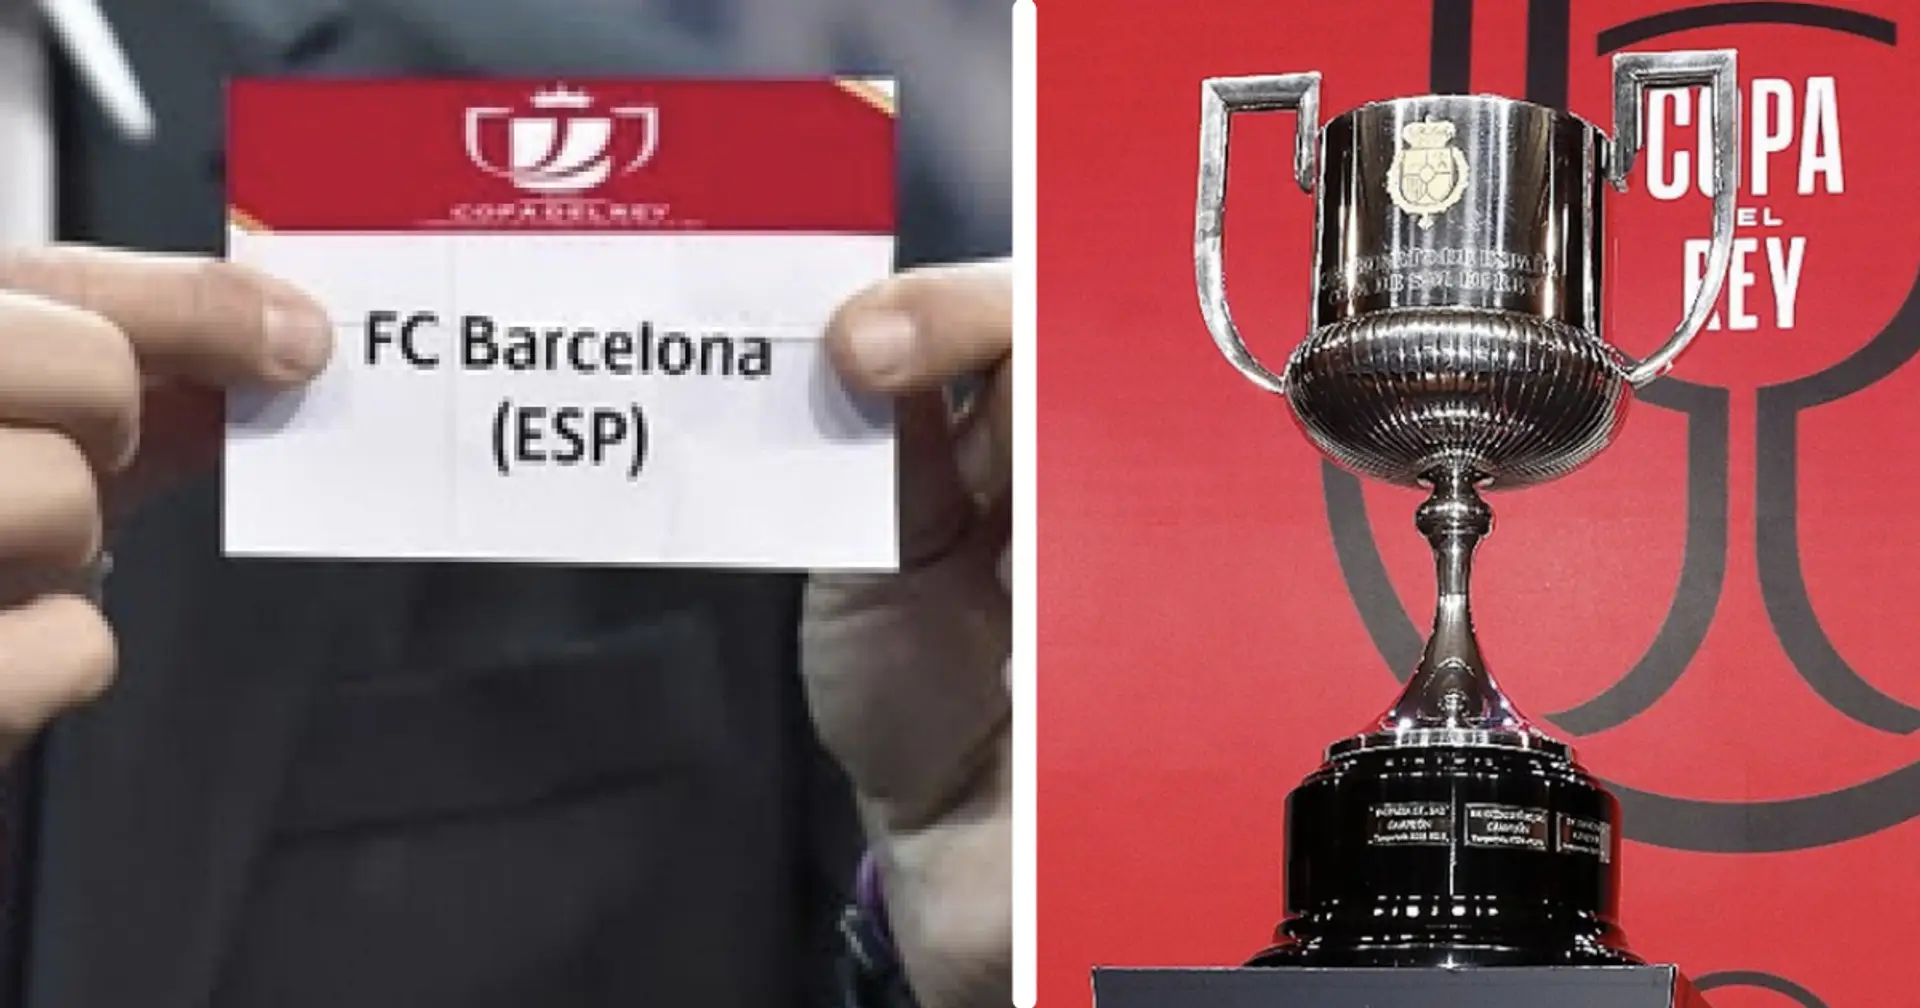 Barca's Copa del Rey last 16 opponent revealed